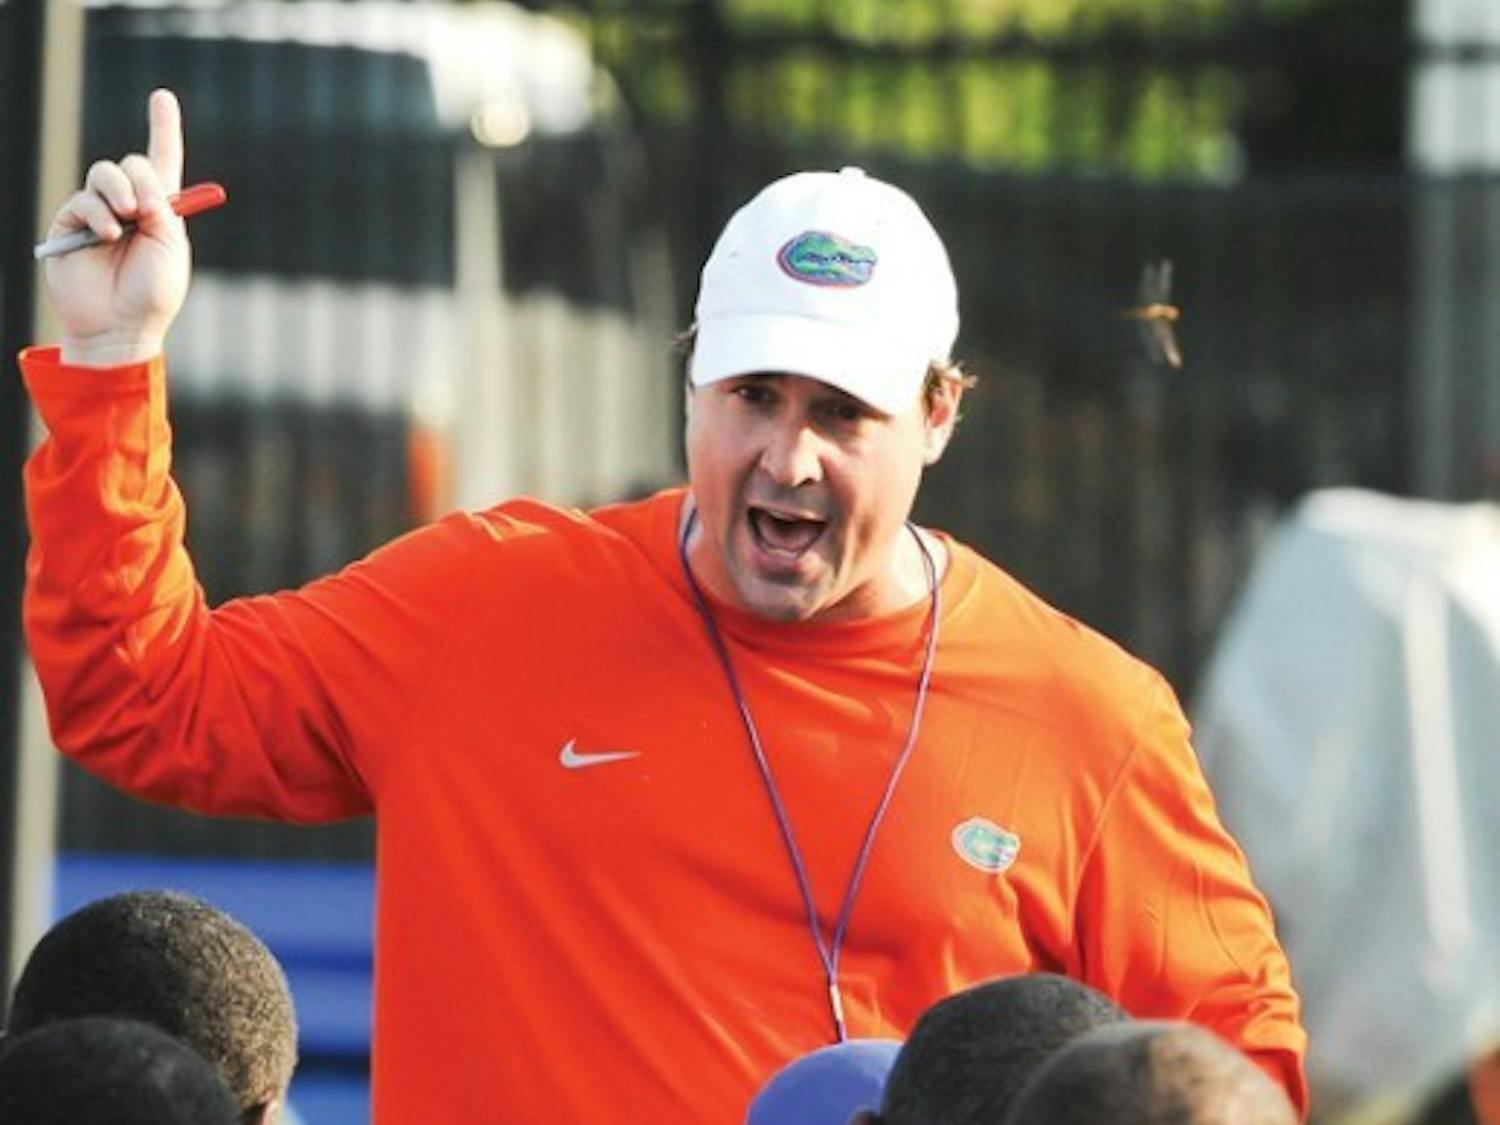 Gators coach Will Muschamp was born in Rome, Ga., but he grew up in Gainesville admiring the Florida program. His family had season tickets in the north end zone, and a younger Muschamp used to sell sodas outside Ben Hill Griffin Stadium.&nbsp;